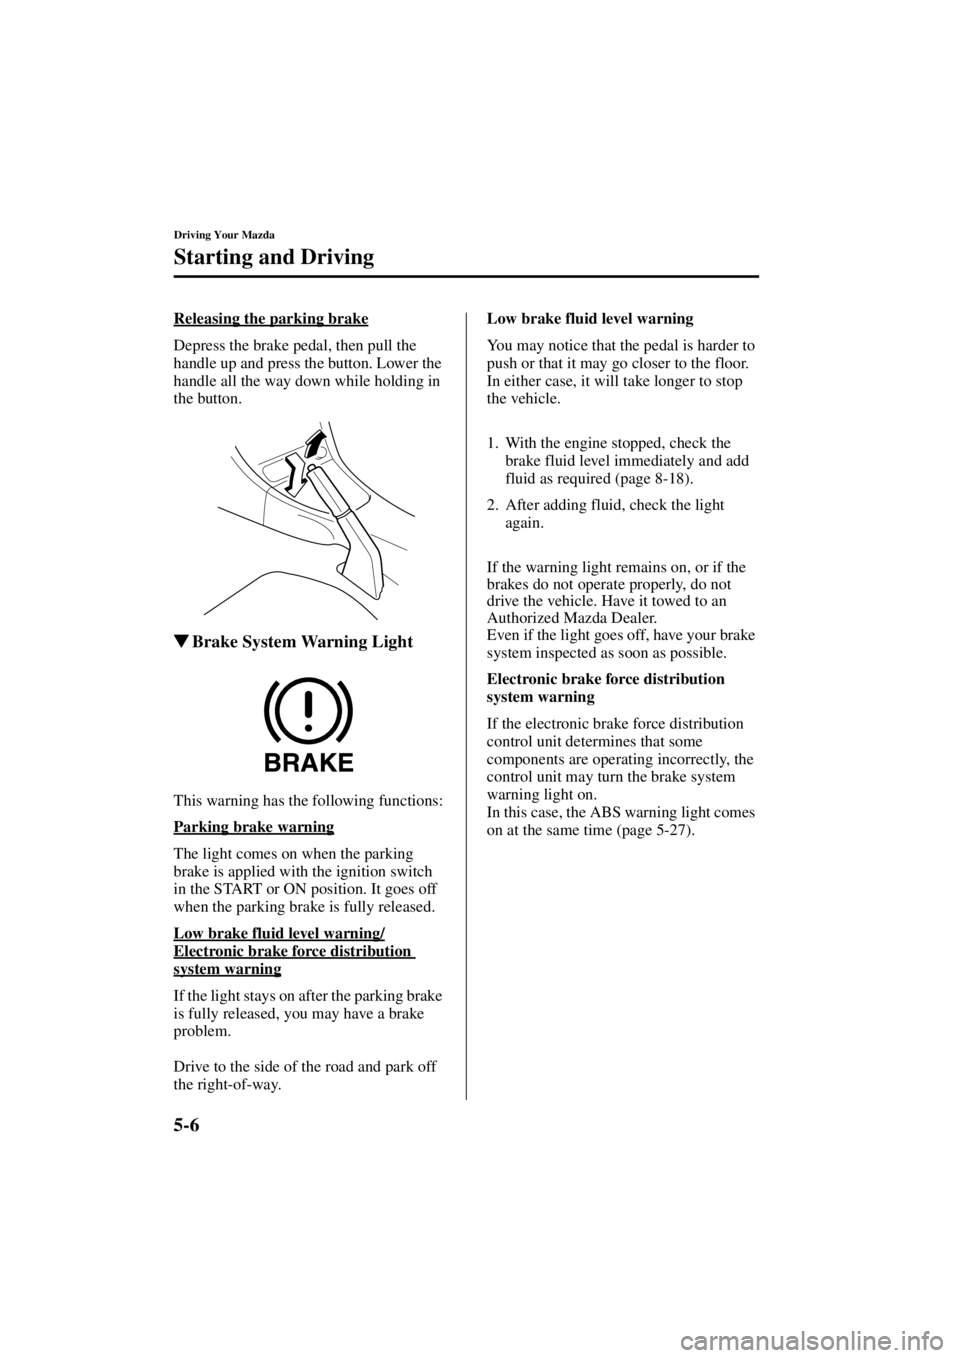 MAZDA MODEL SPEED MX-5 MIATA 2004  Owners Manual 5-6
Driving Your Mazda
Starting and Driving
Form No. 8T02-EA-03L
Releasing the parking brake
Depress the brake pedal, then pull the 
handle up and press the button. Lower the 
handle all the way down 